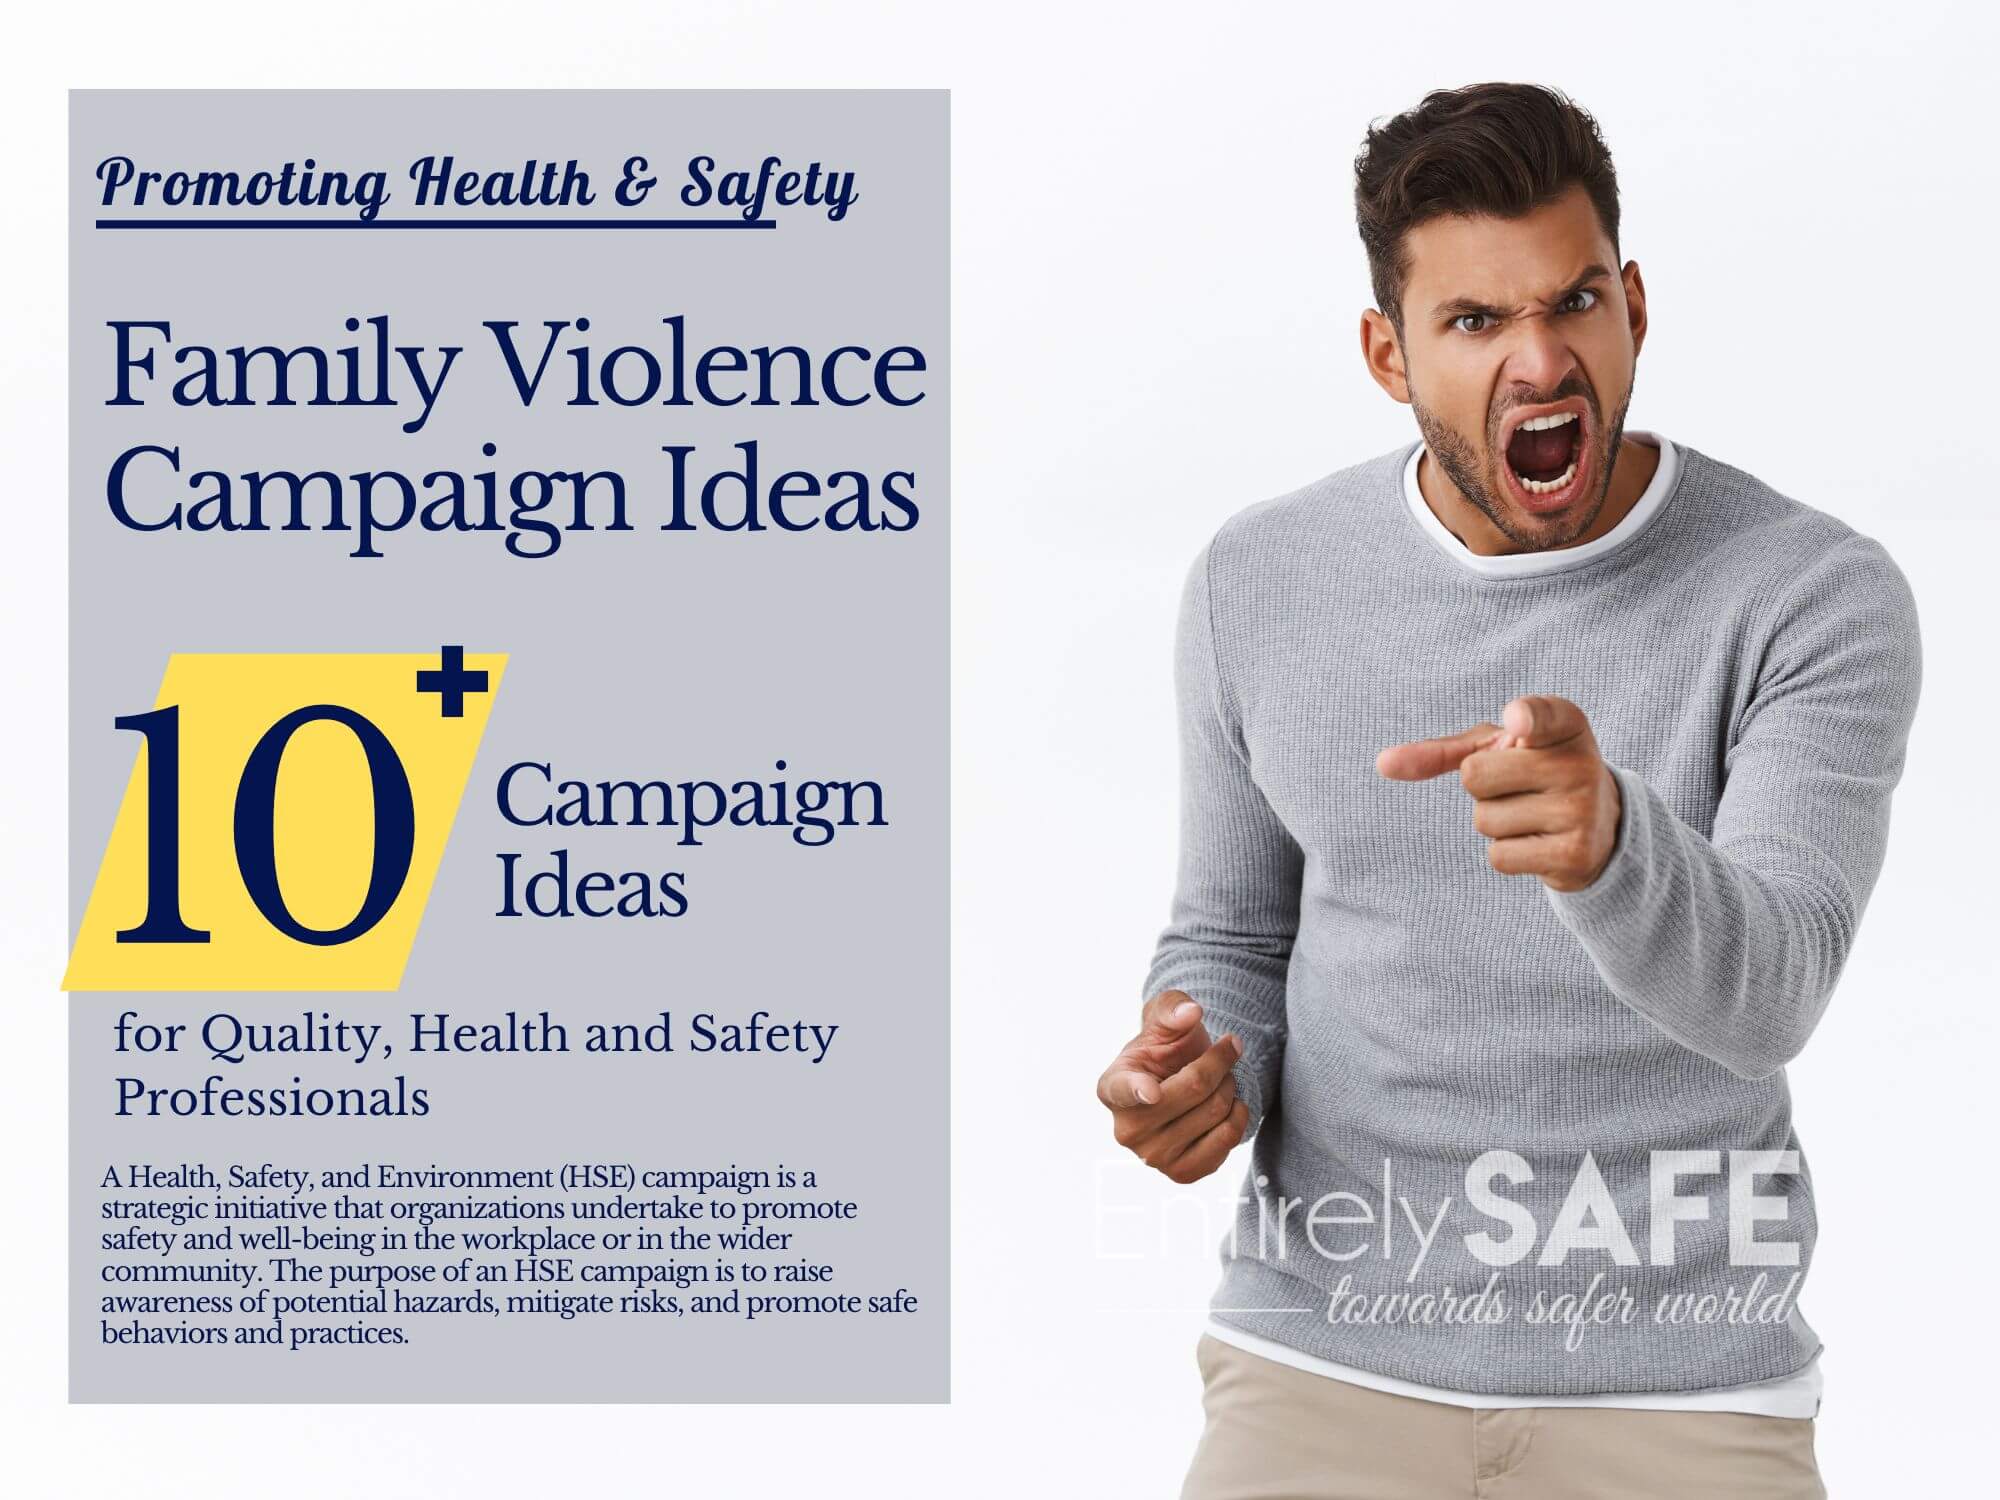 Family Violence Awareness Campaign Ideas (with Real-Life Examples)